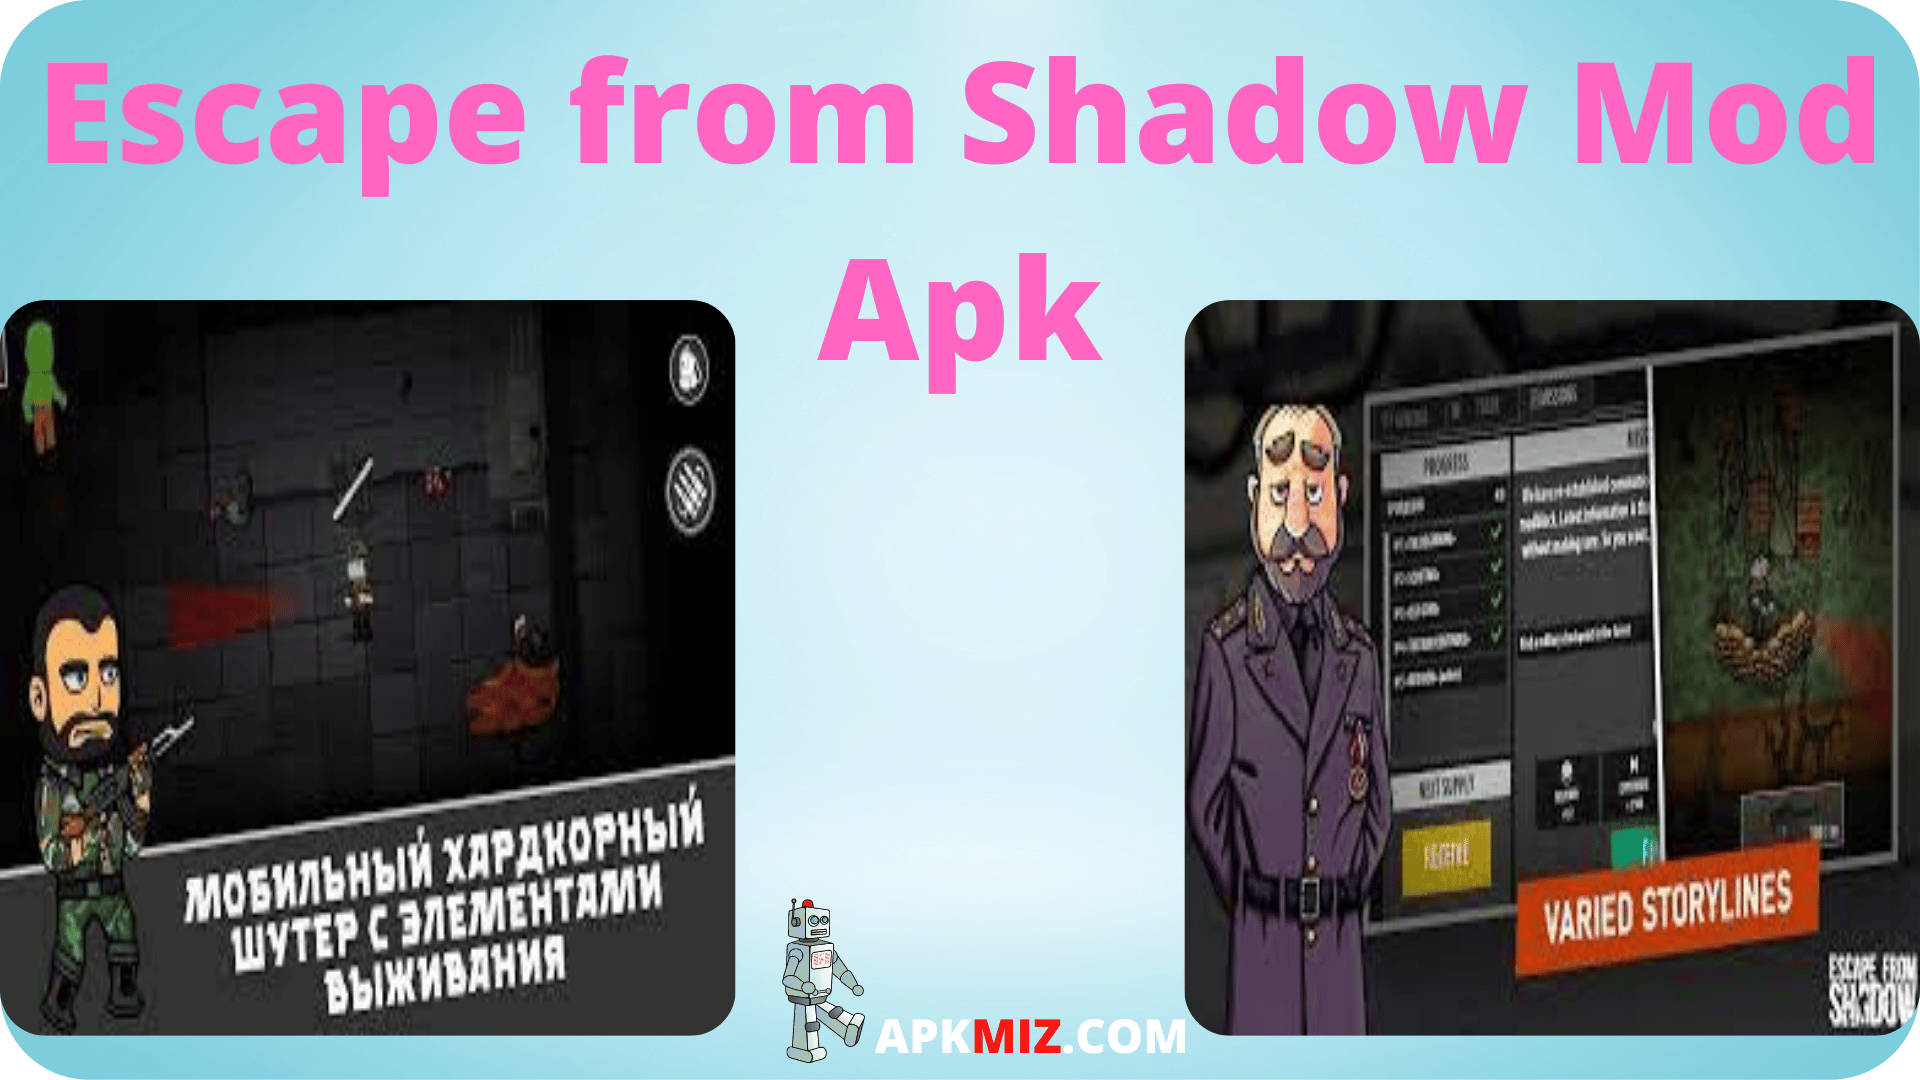 Escape from Shadow Mod Apk